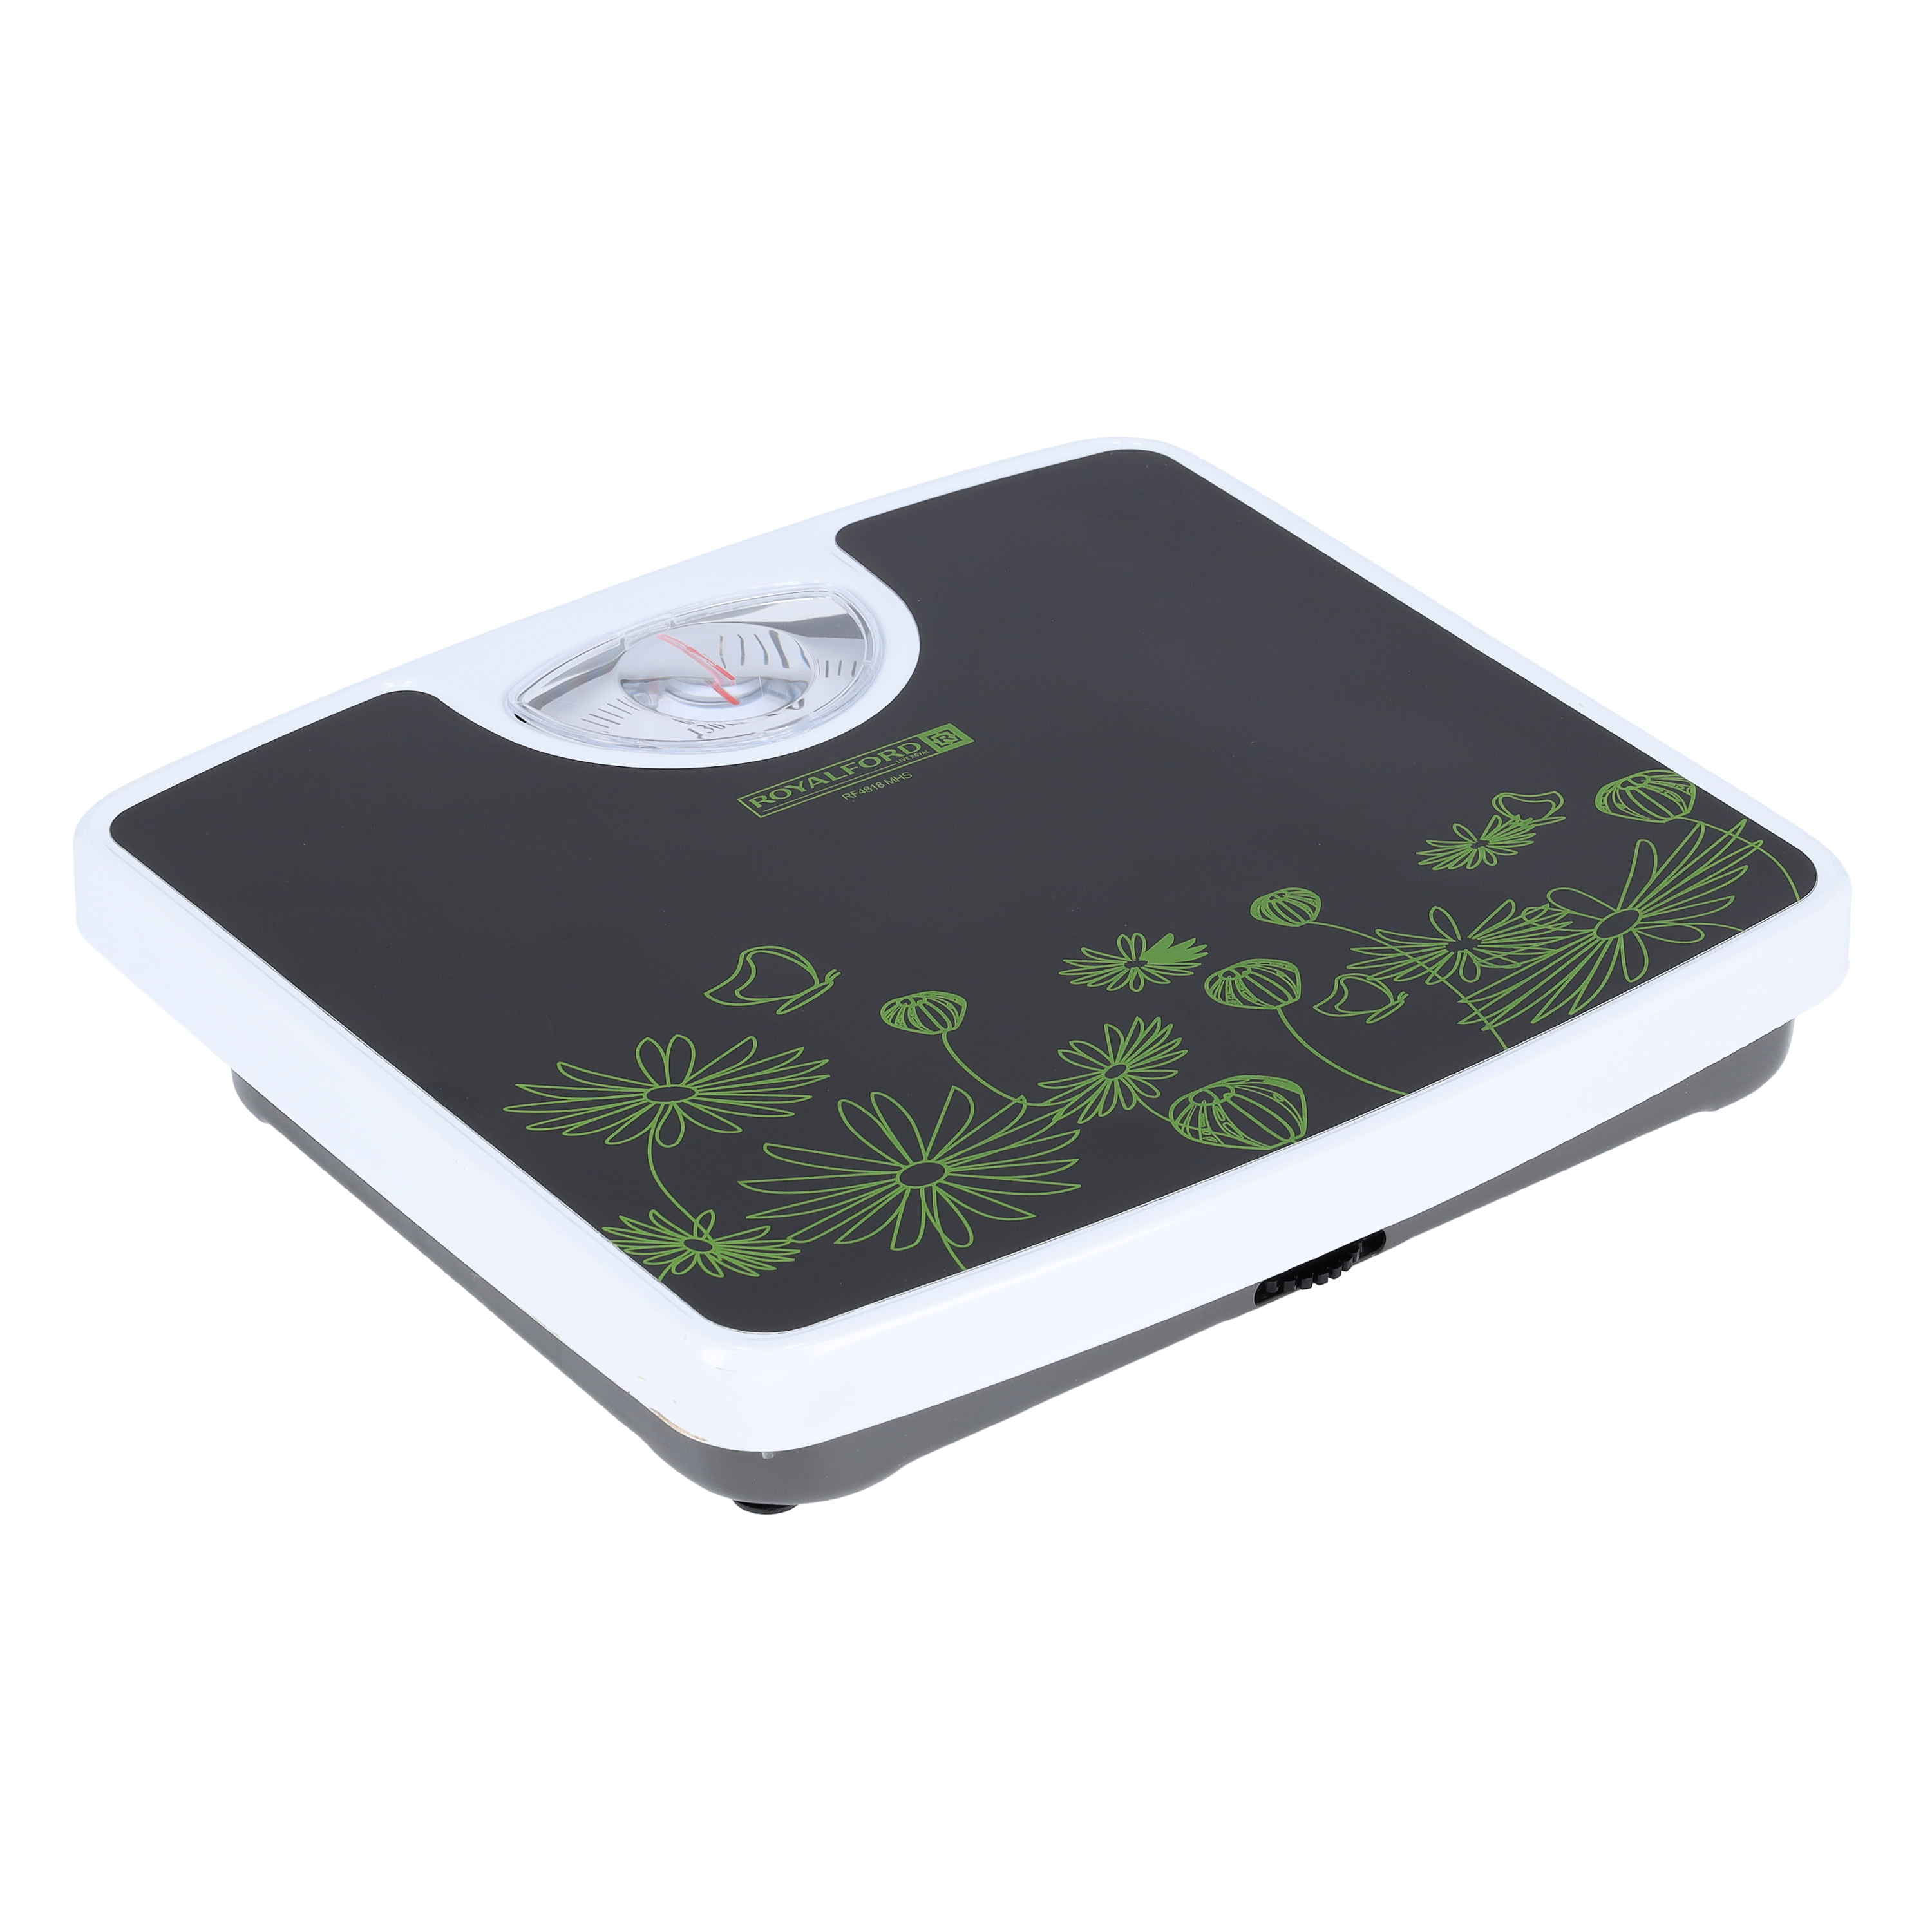 Royalford RF4818 Weighing Scale - Analogue Manual Mechanical Weighing  Machine for Human Body-Weight Machine, 130Kg Capacity